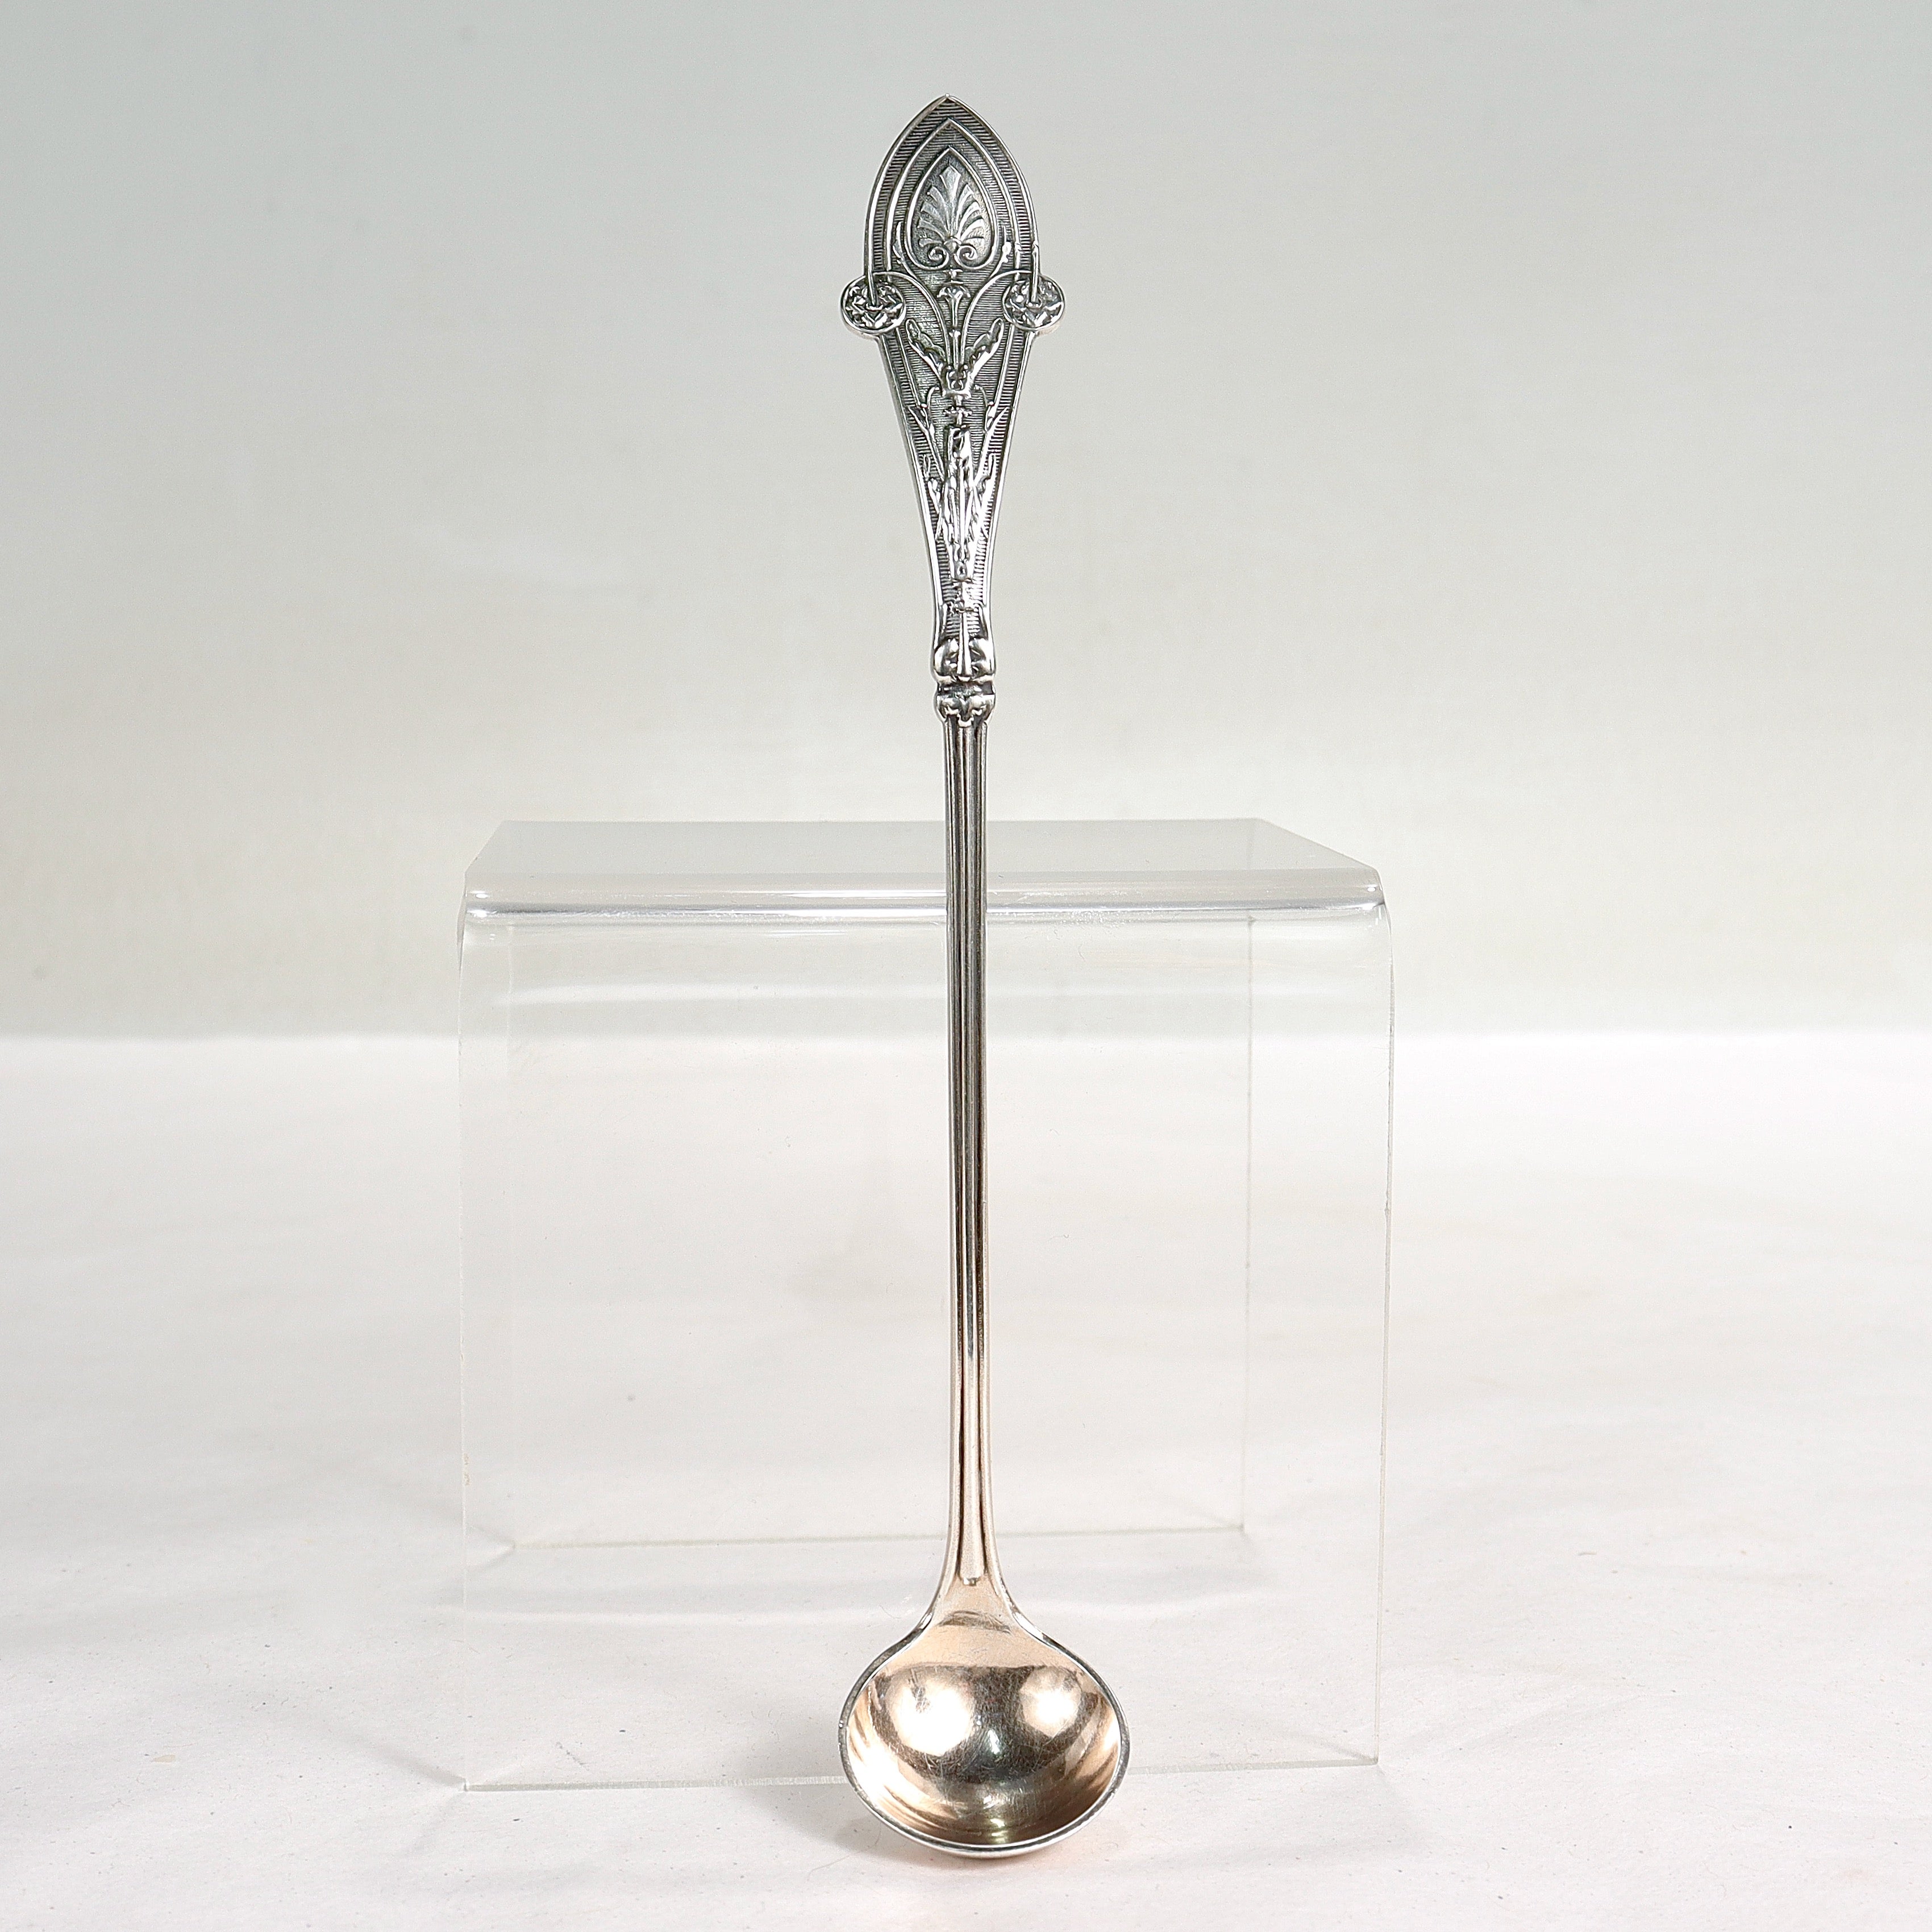 A fine antique Italian pattern mustard ladle.

By Tiffany & Co.

In sterling silver.

Designed by Edward C. Moore and issued in 1870. 

Simply a wonderful serving piece in a wonderful Tiffany pattern!

Date:
Late 19th Century

Overall Condition:
It